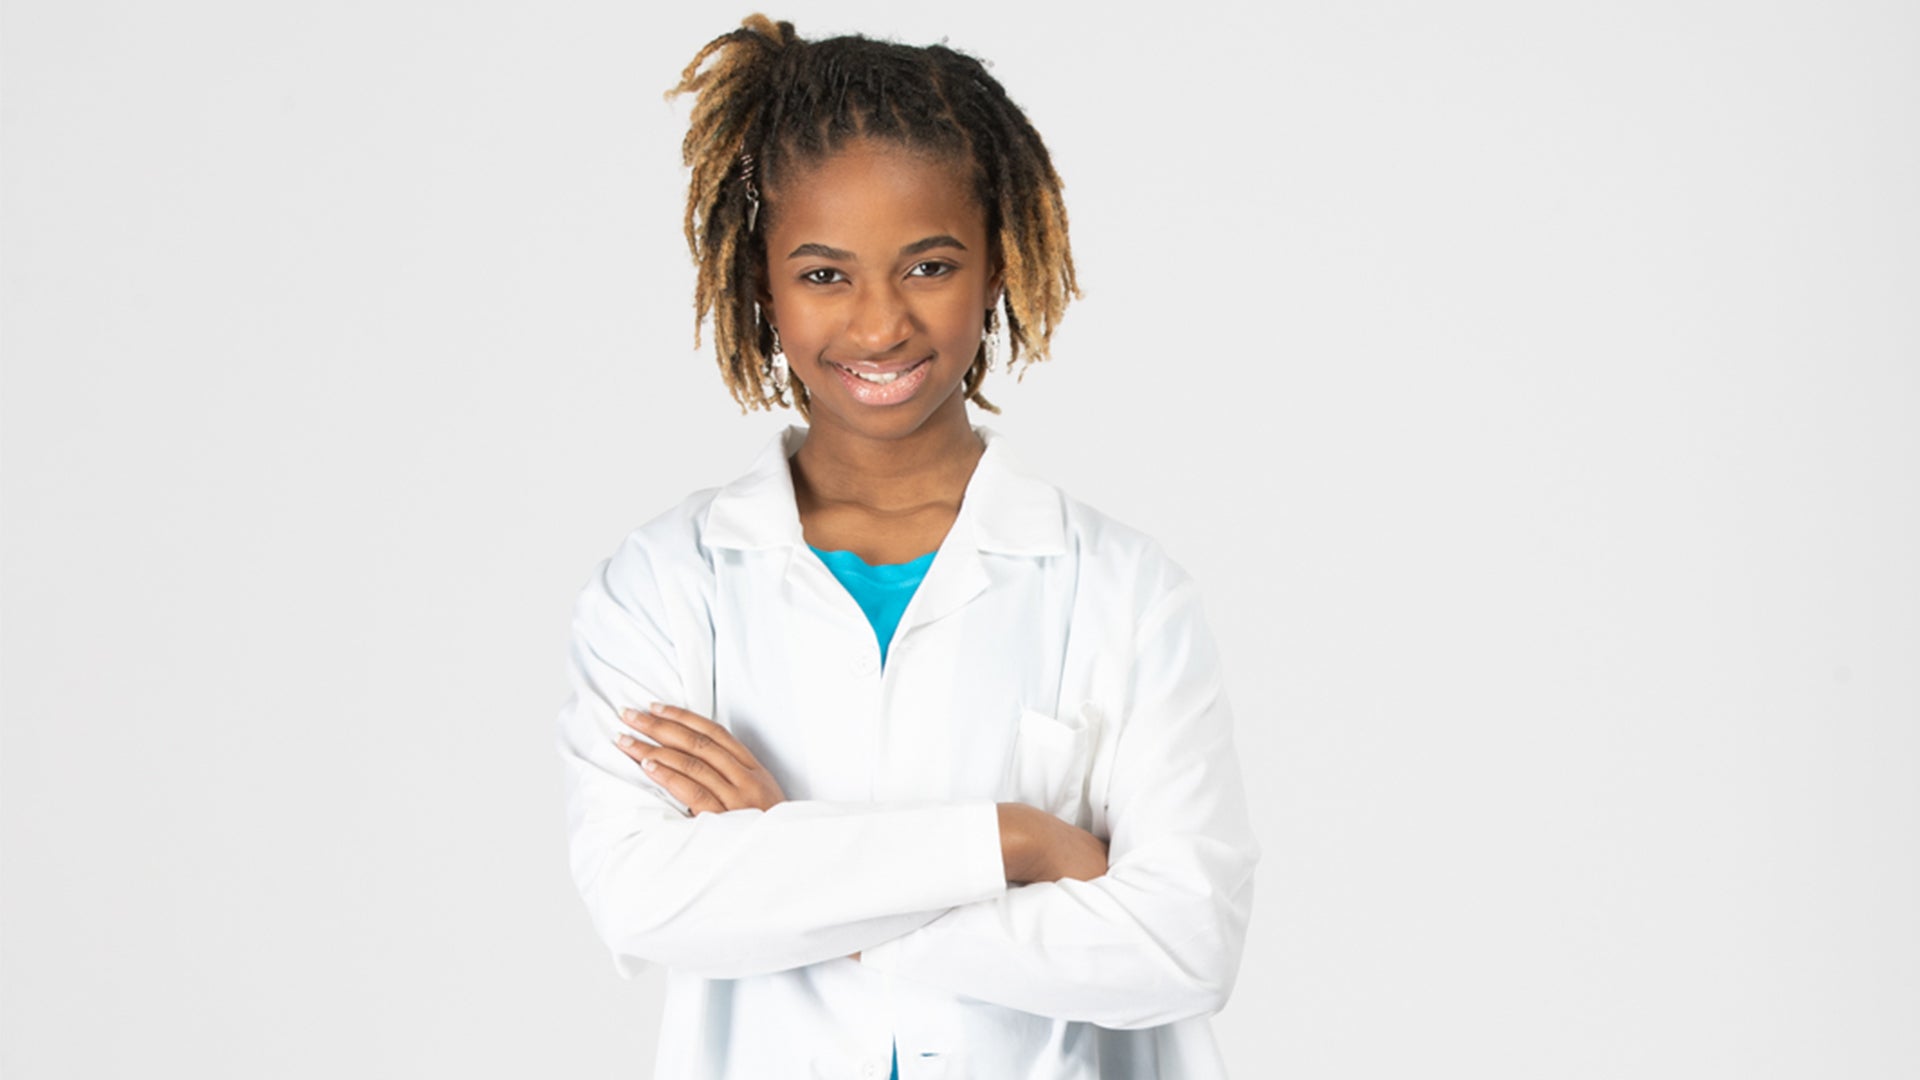 13-Year-Old Just Became The Youngest Black Medical School Student in US History